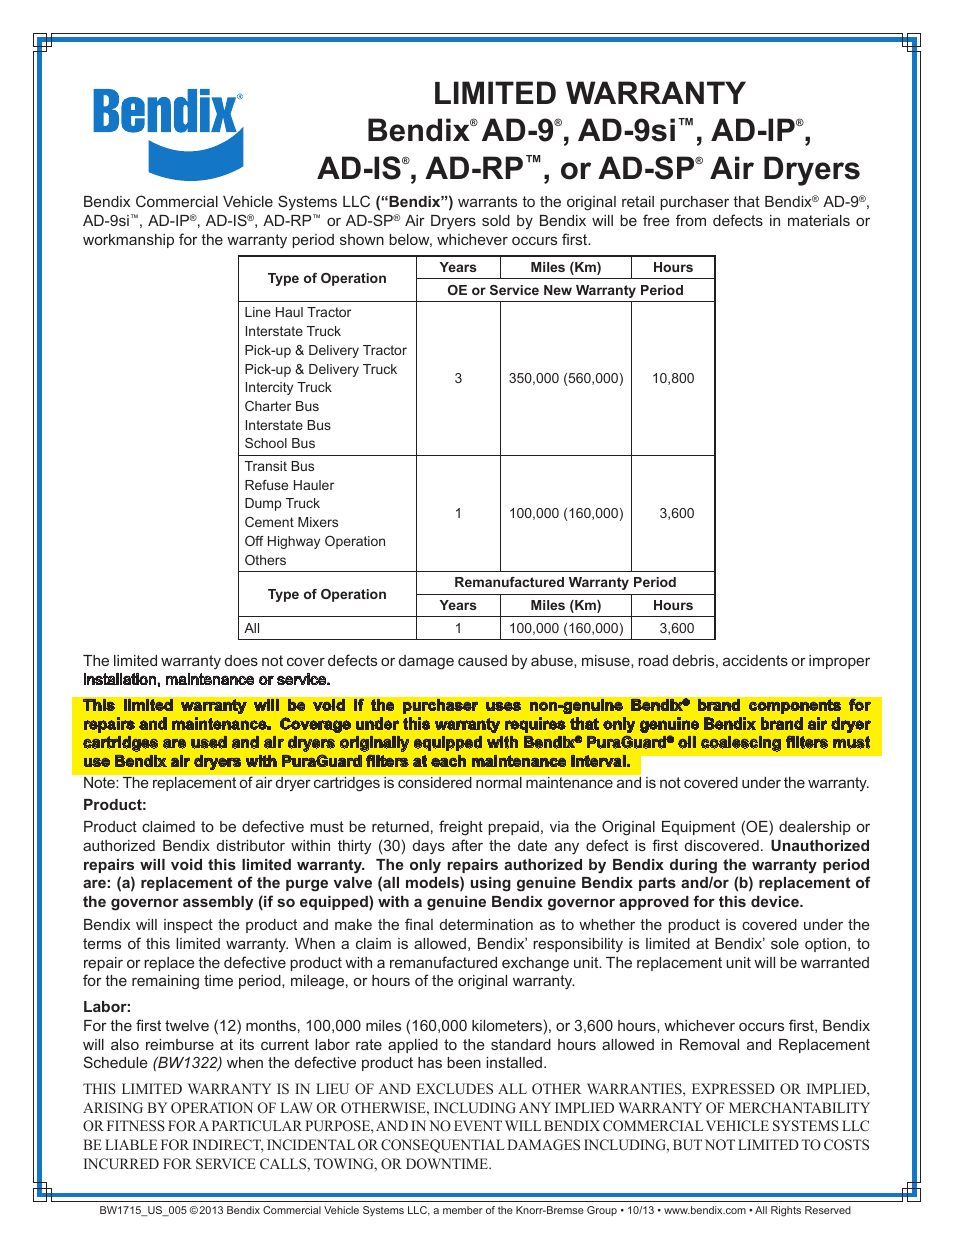 AD-IS Air Dryers